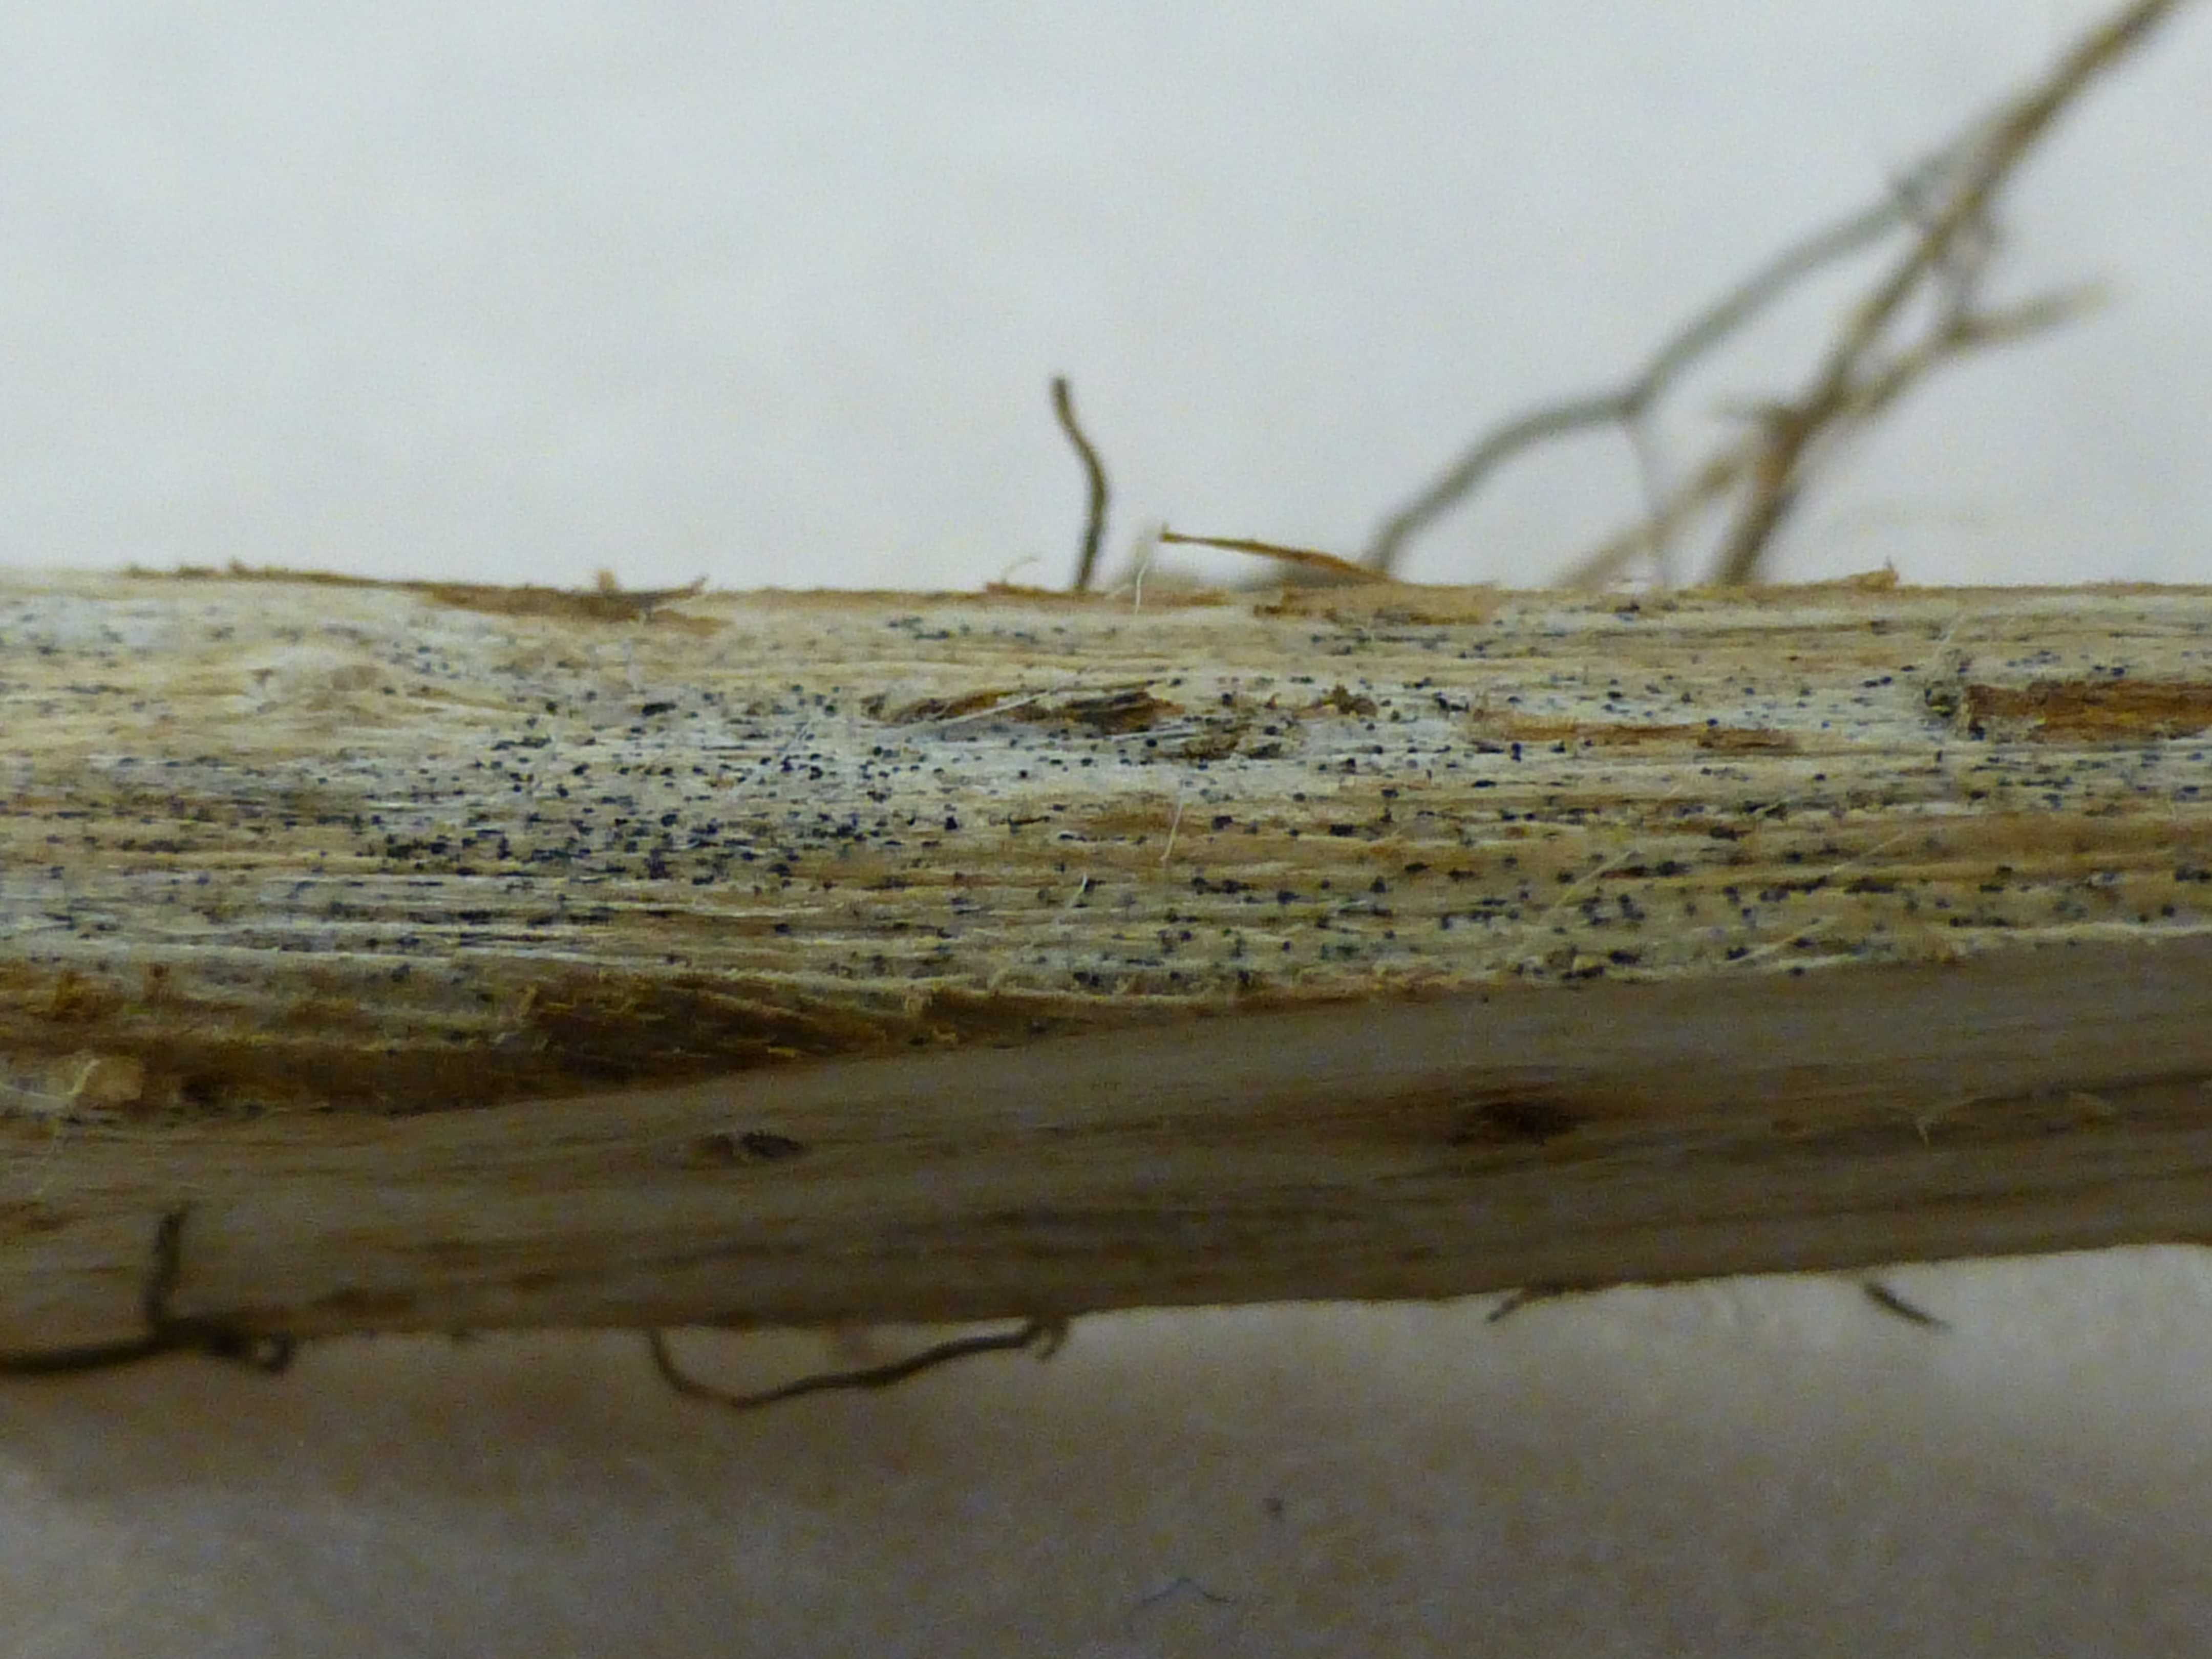 Charcoal-like, gray discoloration from numerous microsclerotia characteristic of charcoal rot.